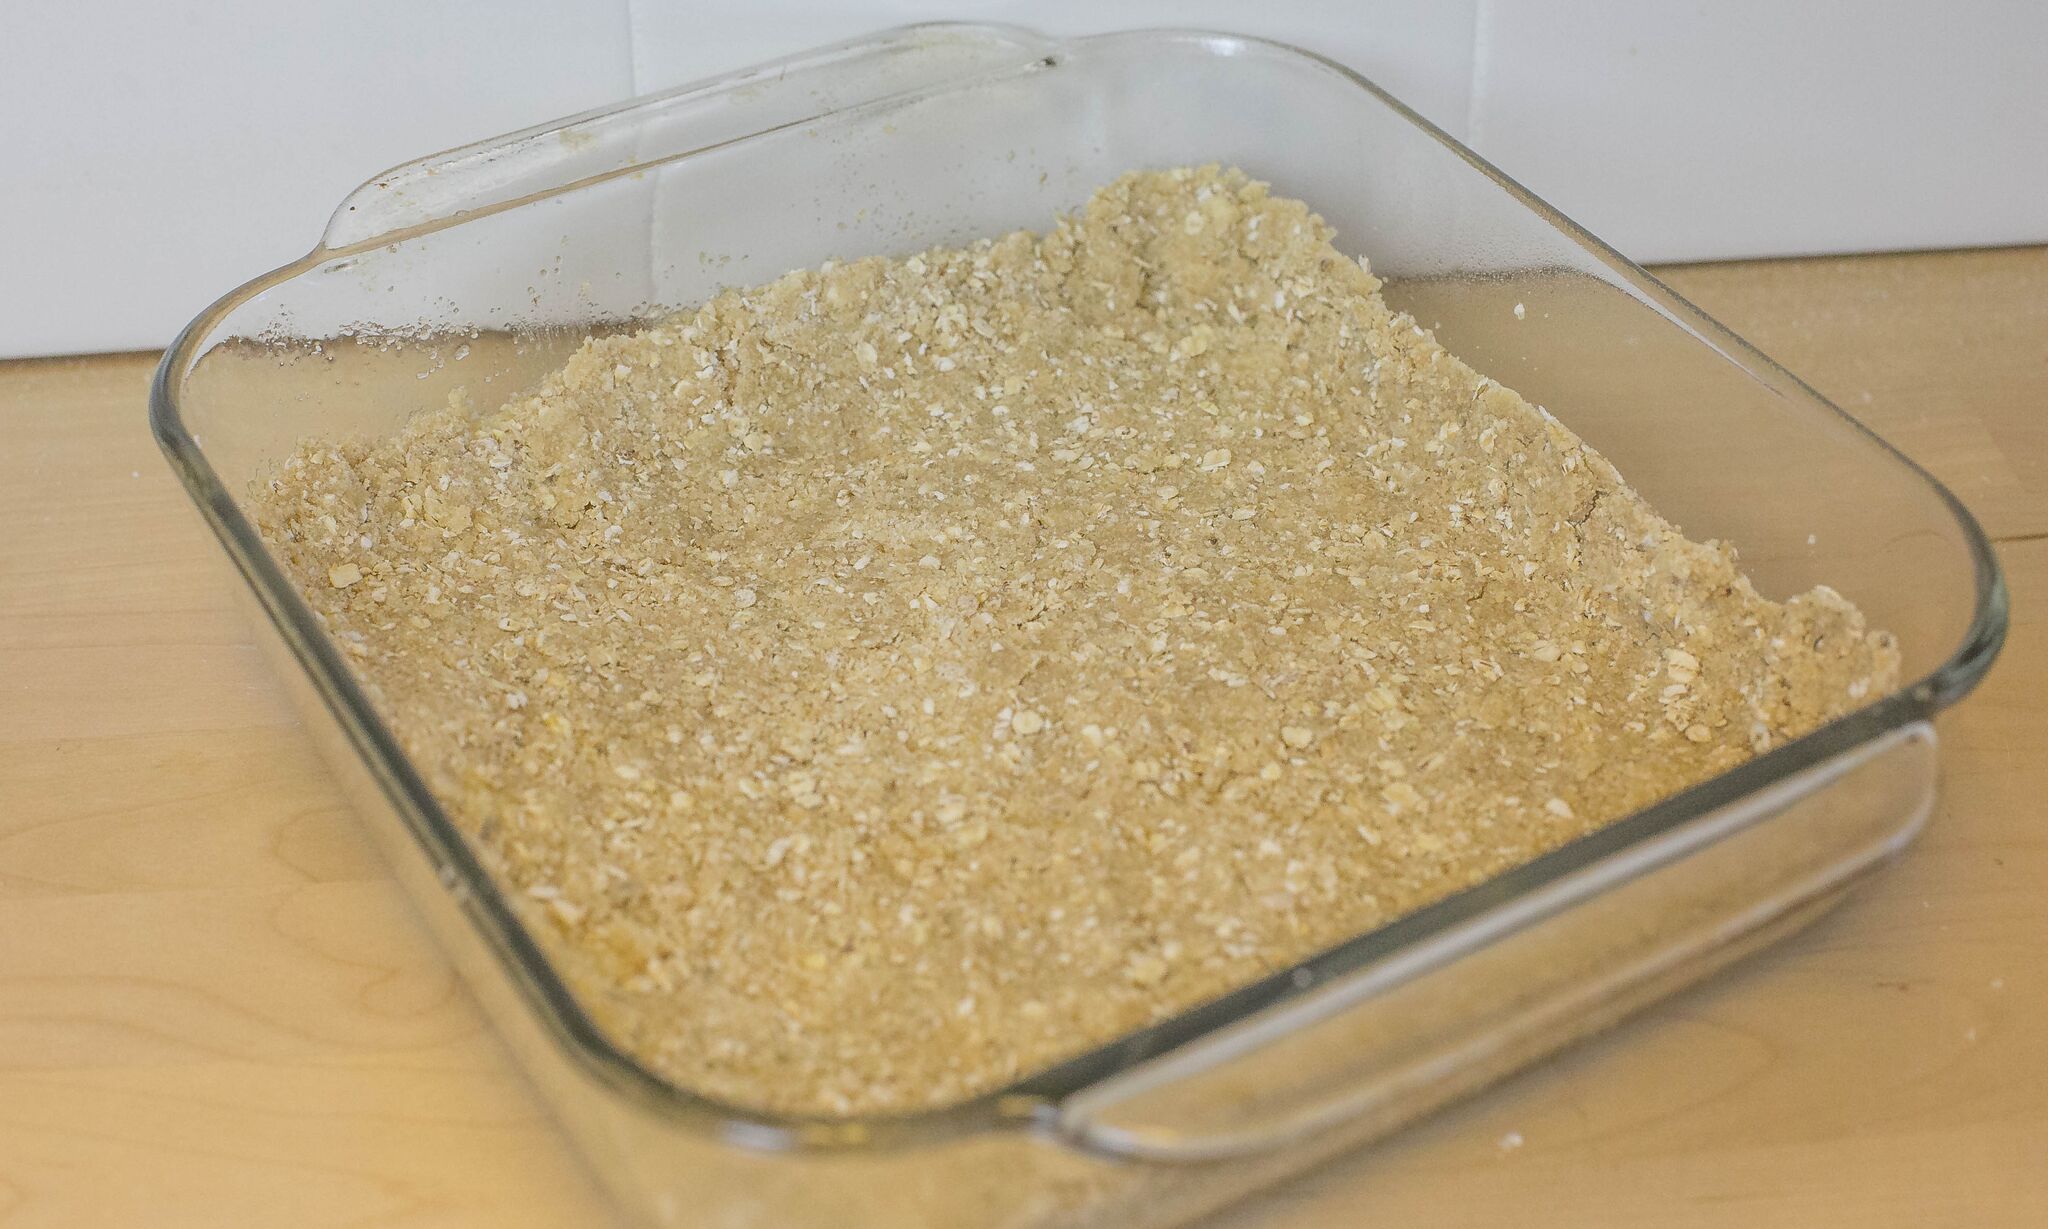 Press the remaining cookie mixture into the bottom of the baking dish.